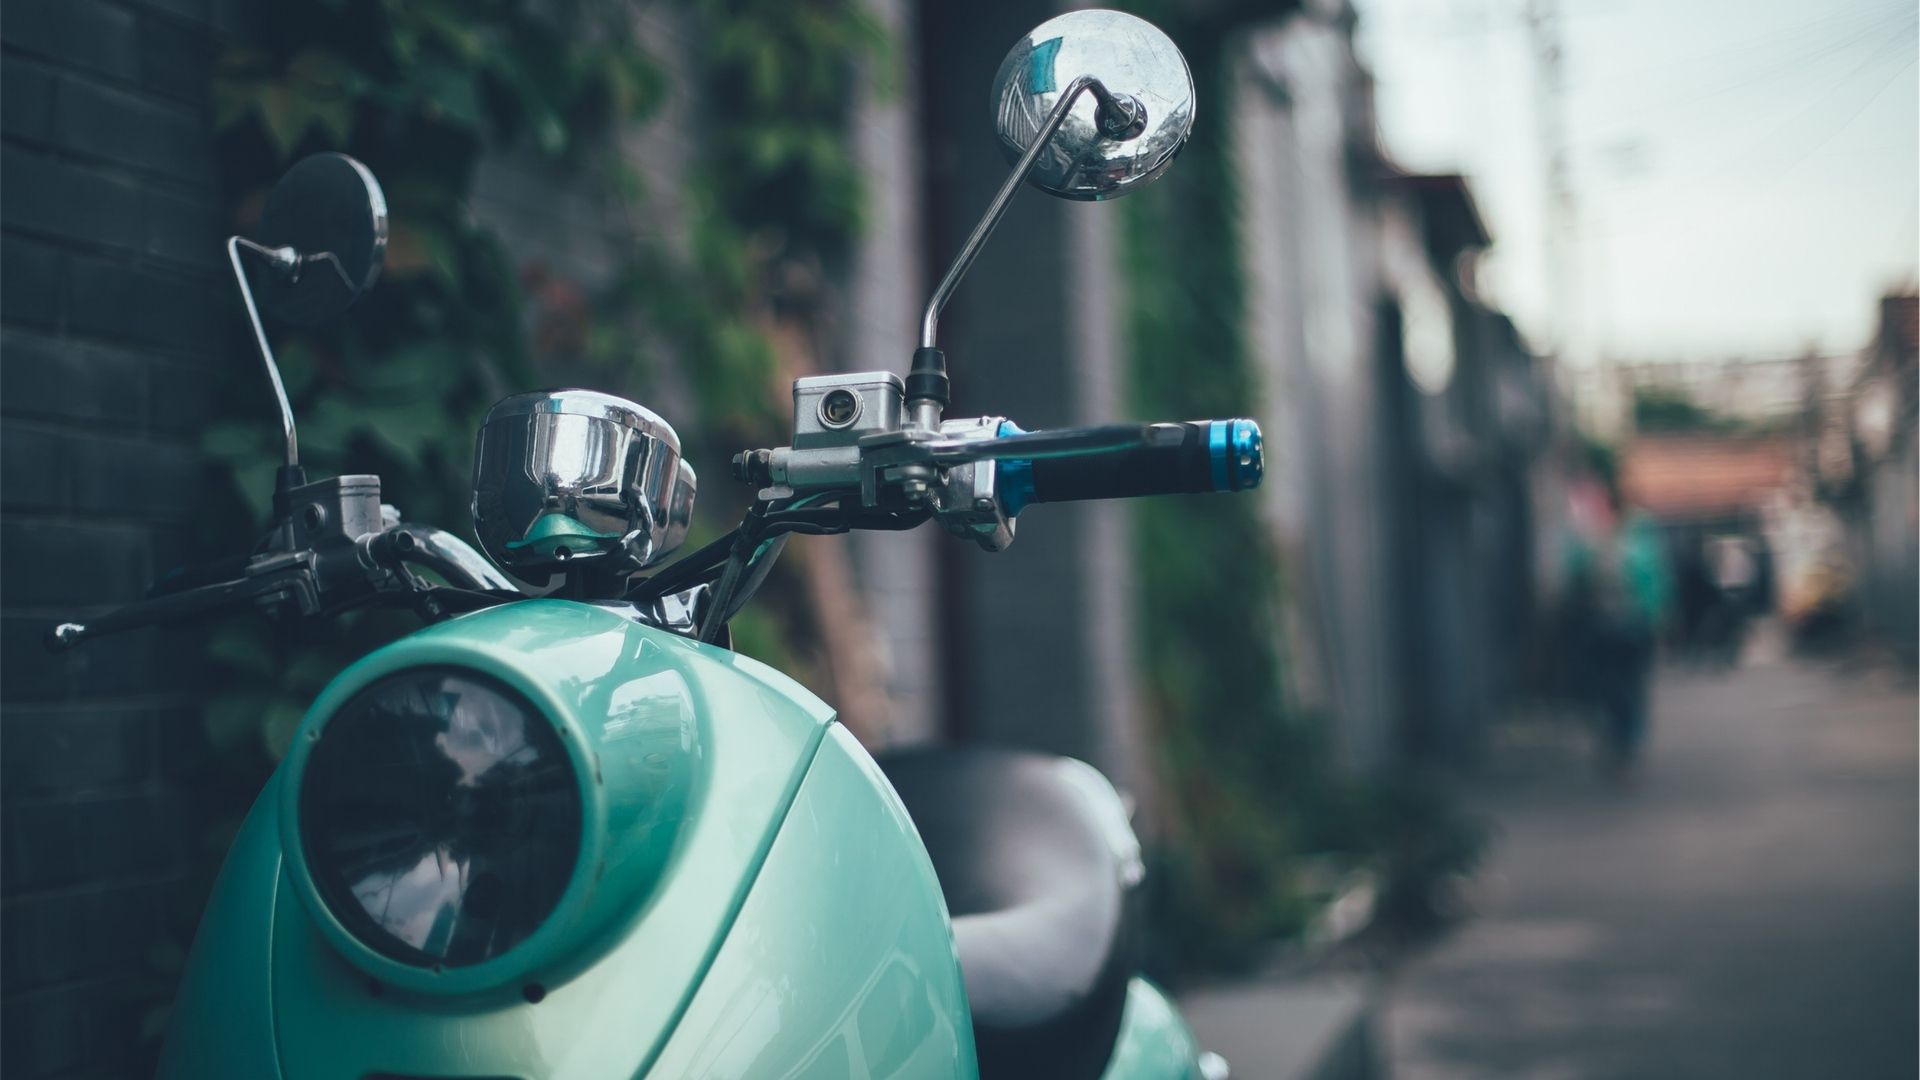 Vespa Scooter Vintage Laptop Full HD 1080P HD 4k Wallpaper, Image, Background, Photo and Picture